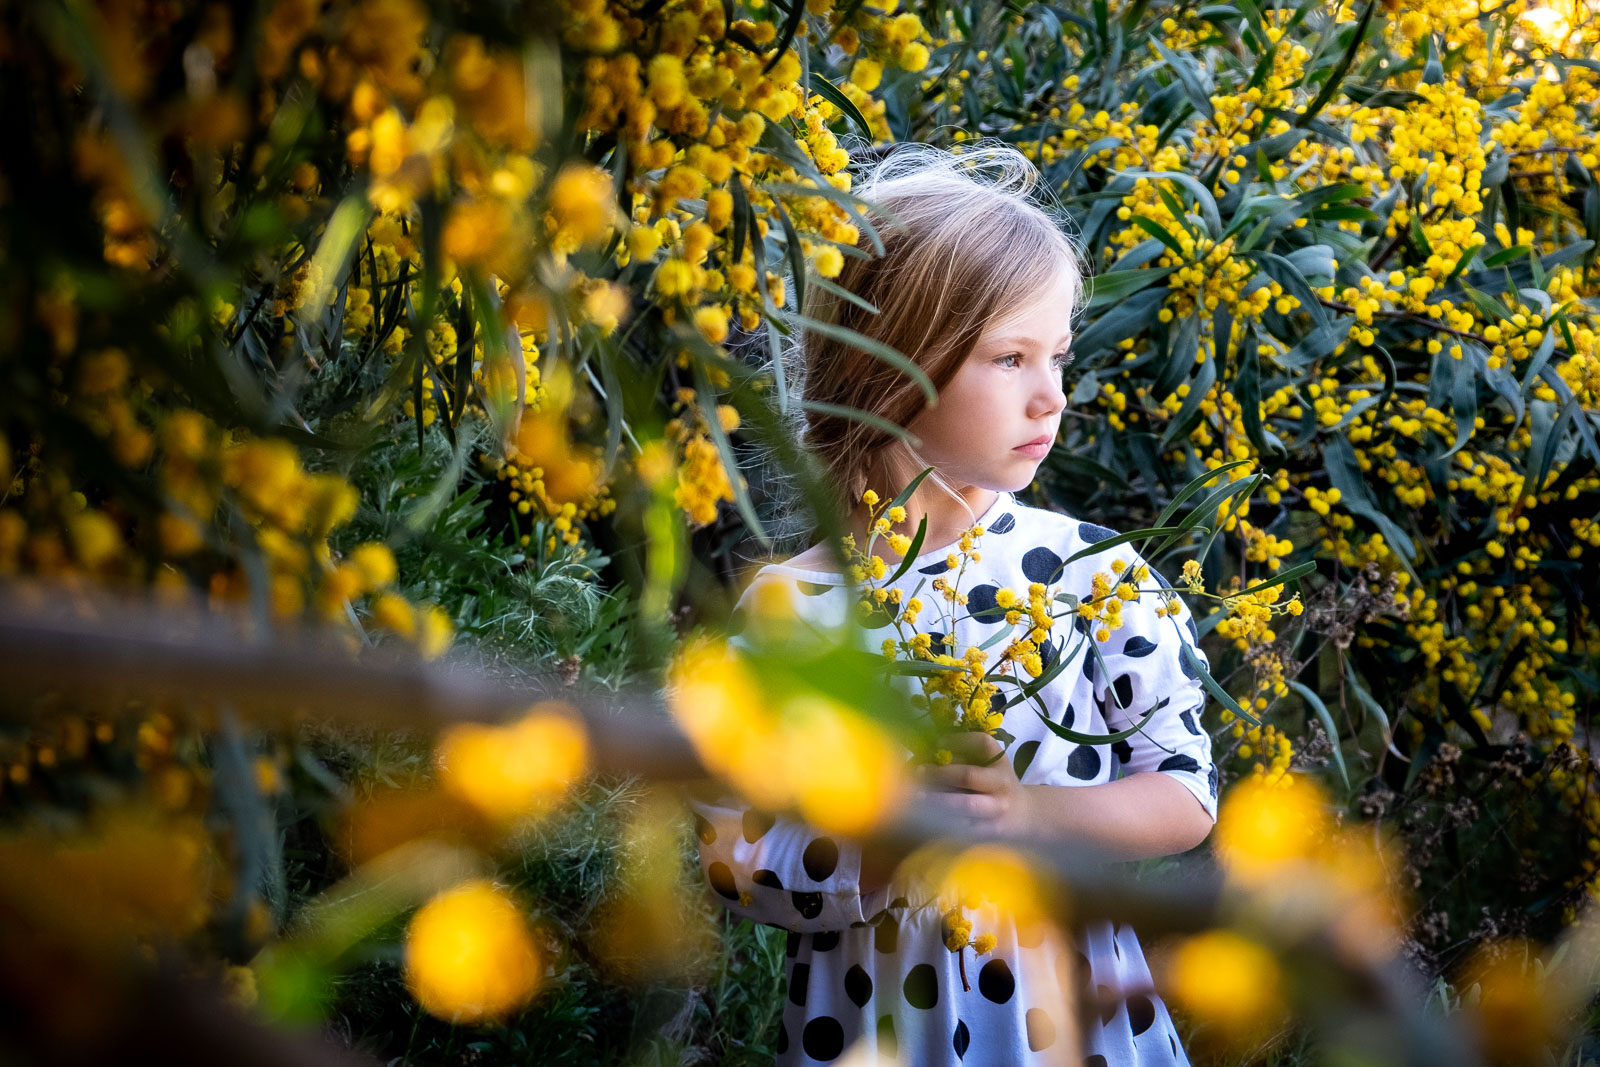 Unexpected Backdrop- Flower bed yellow flowers girl standing looking into distance karlee hooper